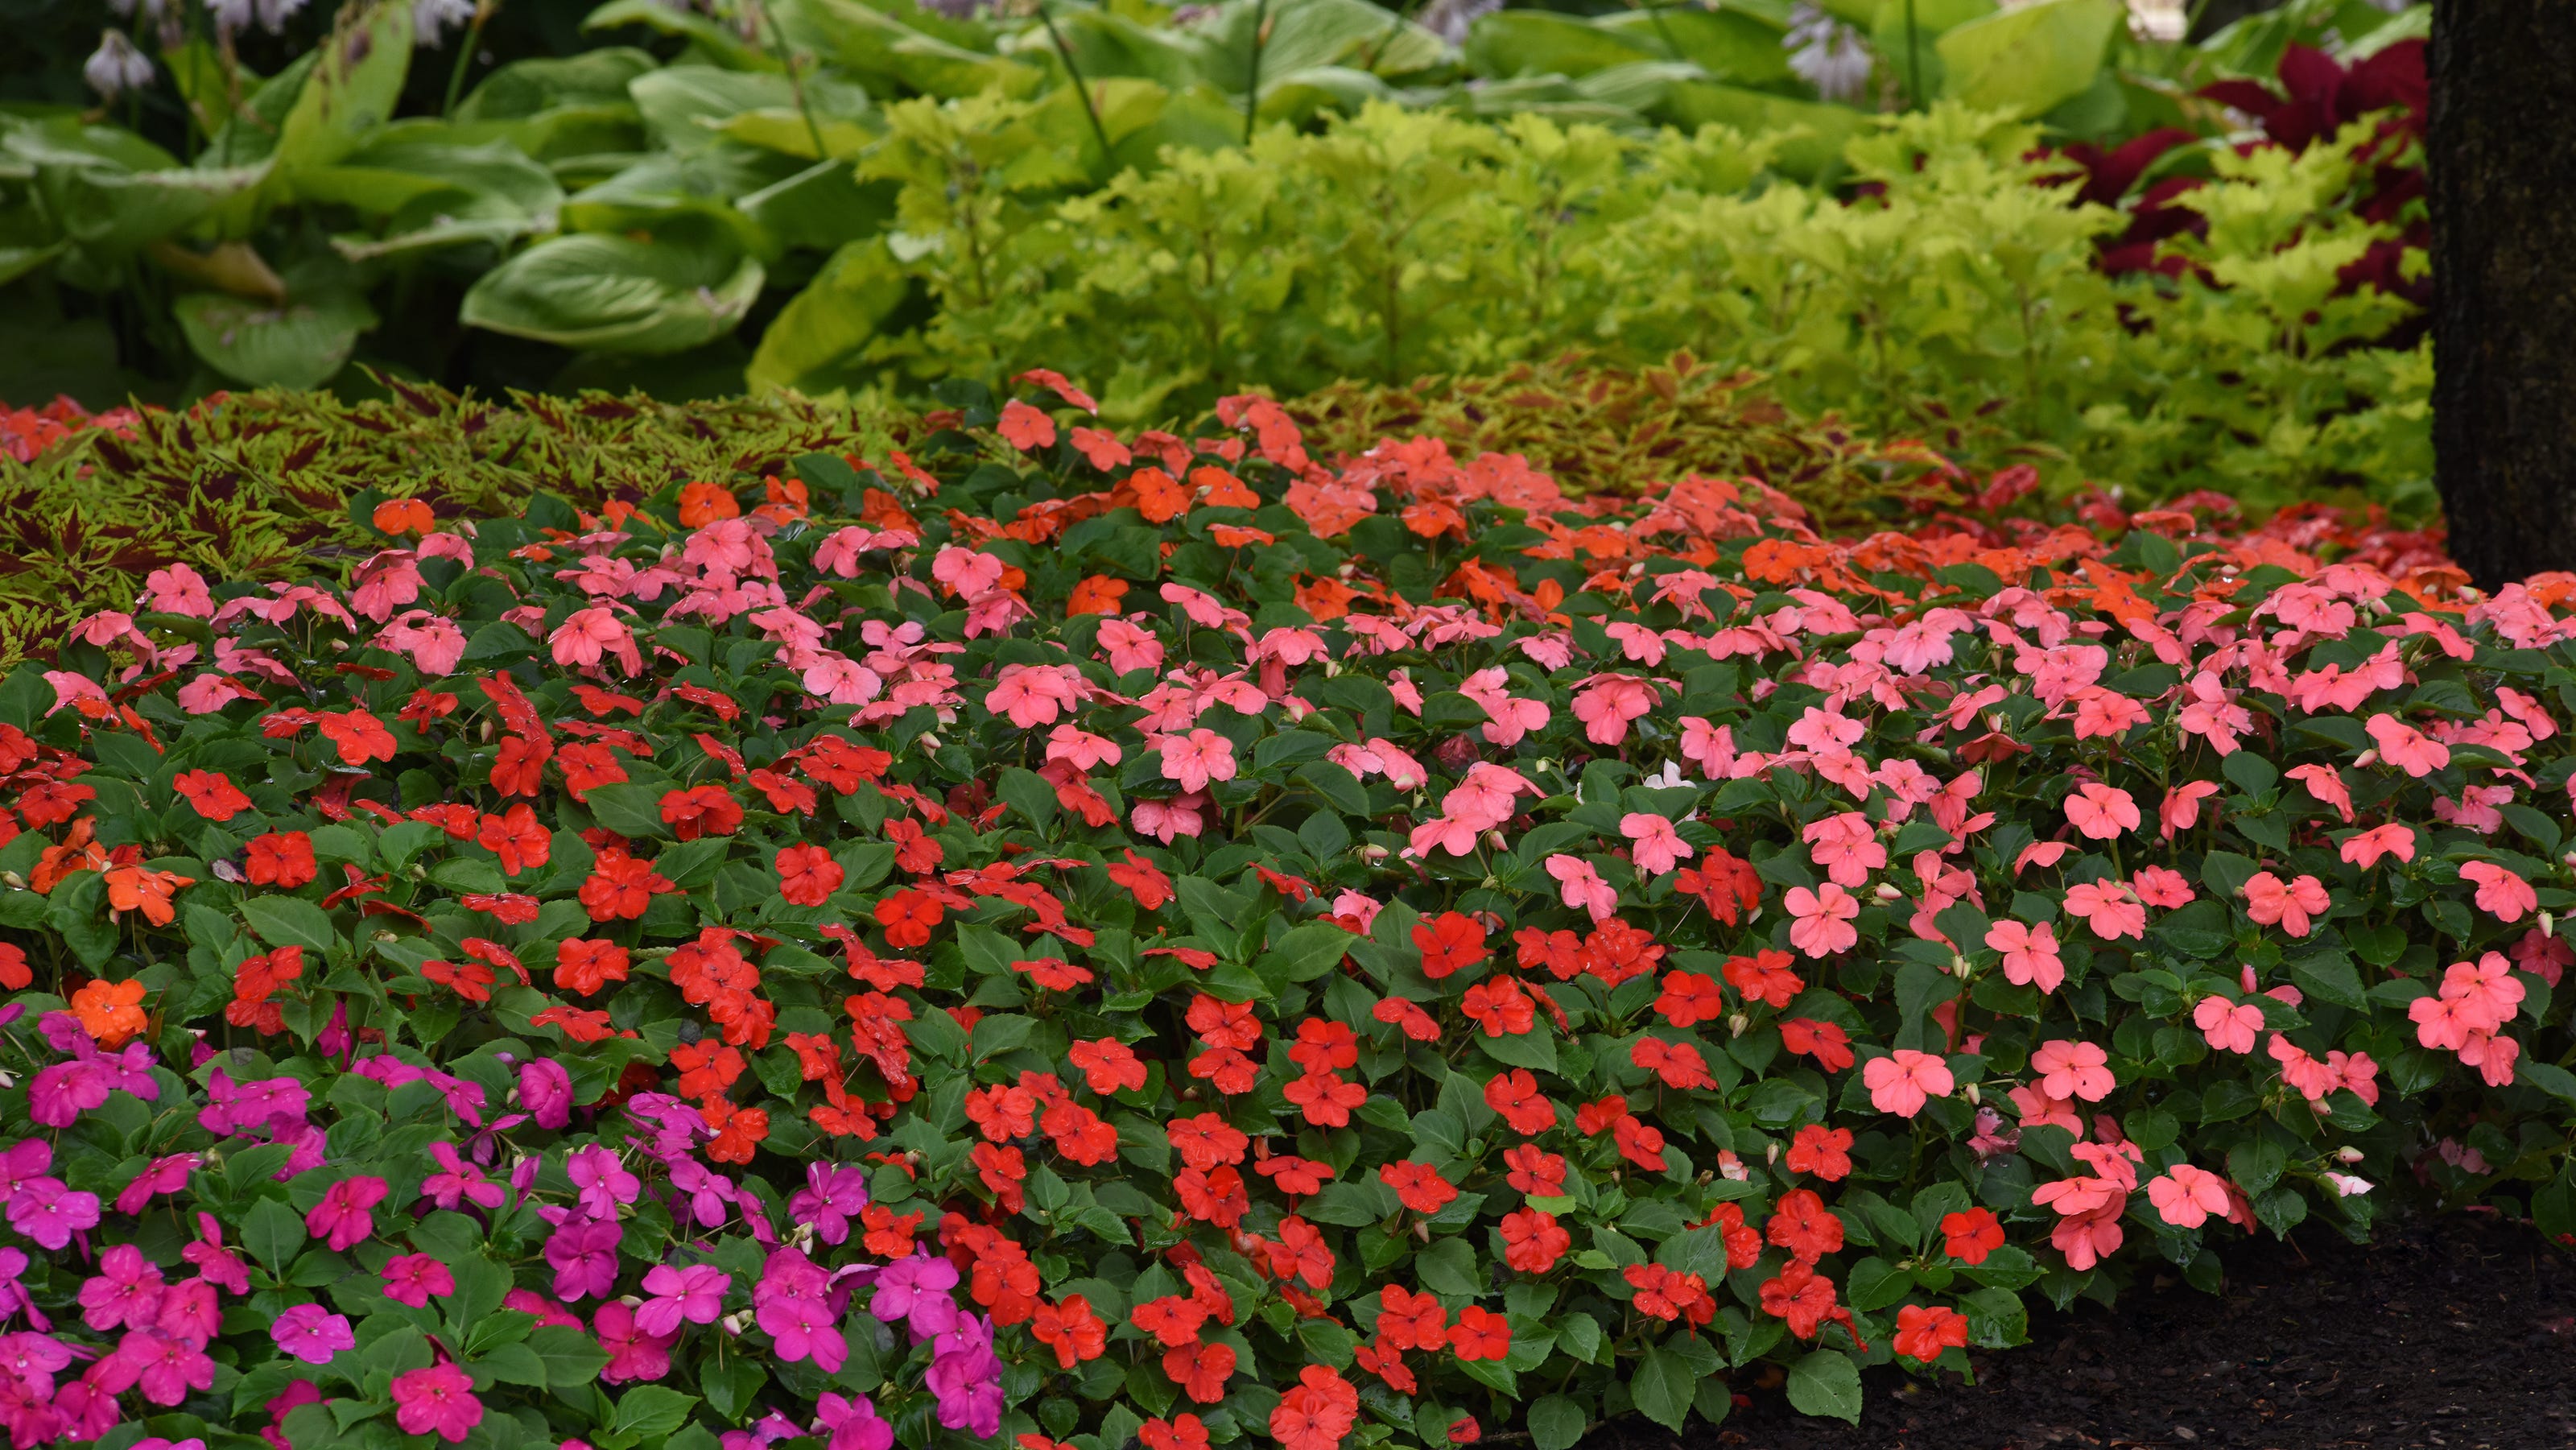 Gardening: New hybrid of impatiens designed to fight disease